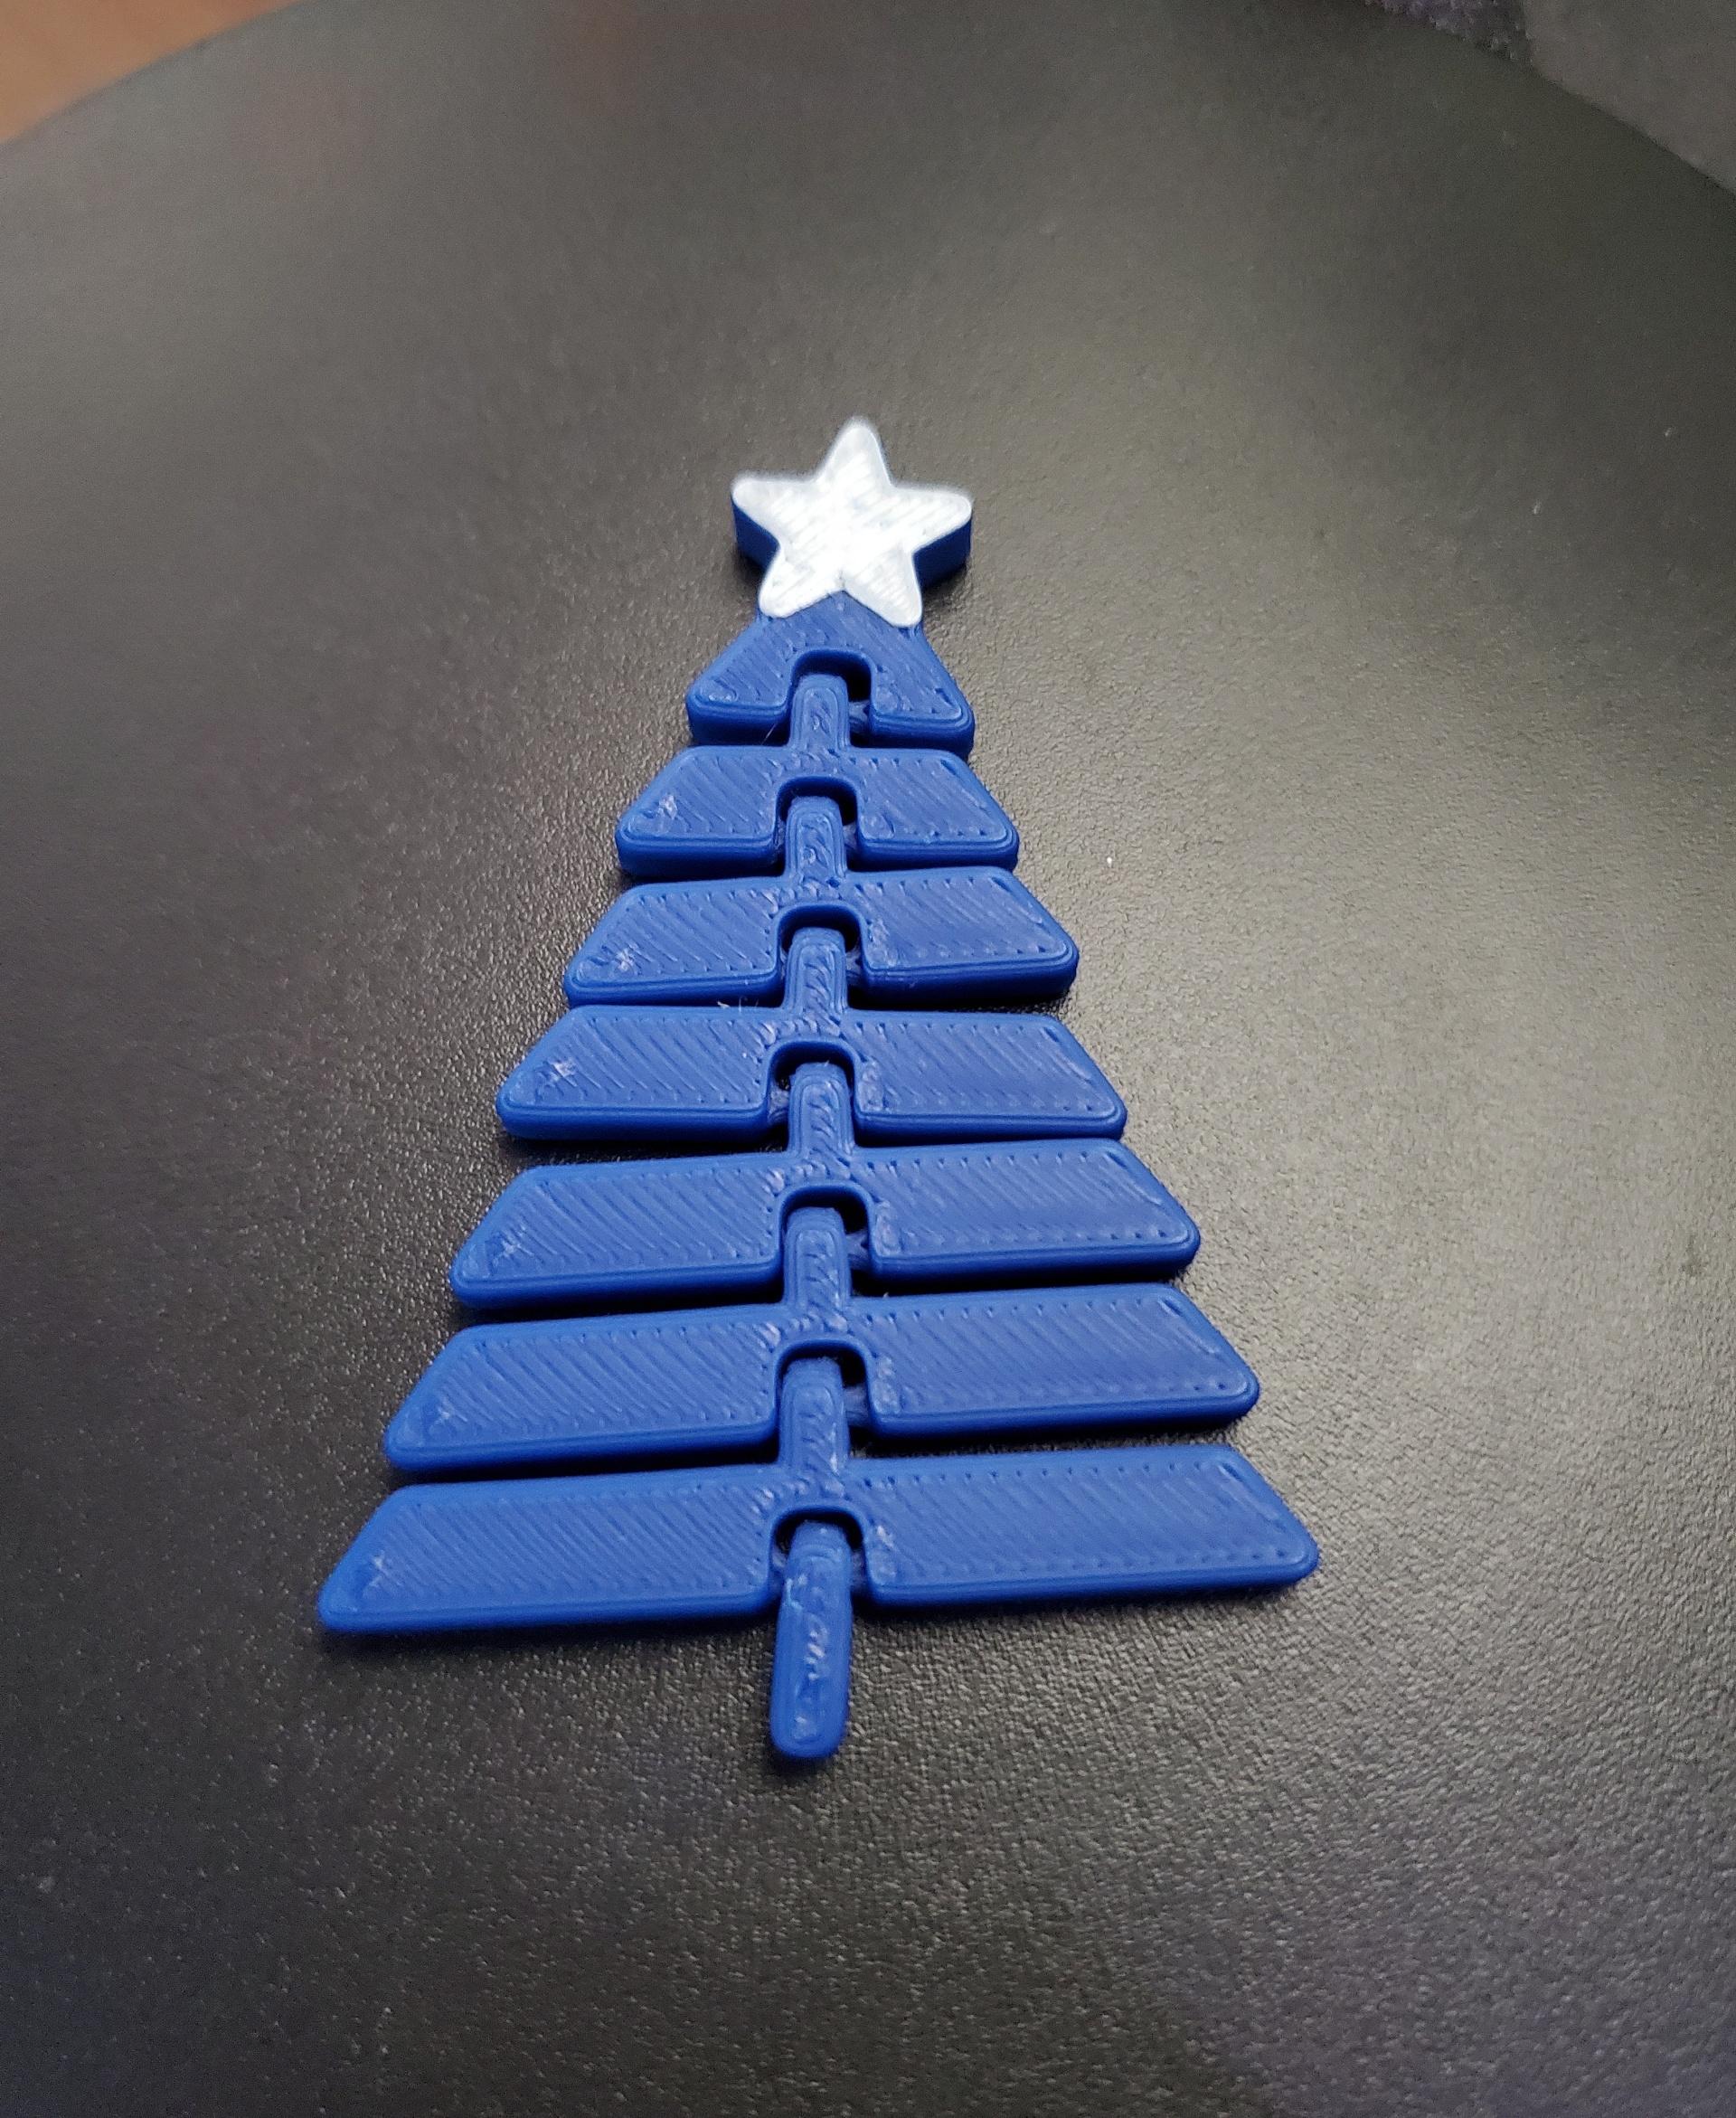 Articulated Christmas Tree with Star - Print in place fidget toy - 3mf - polymaker pla pro blue - 3d model